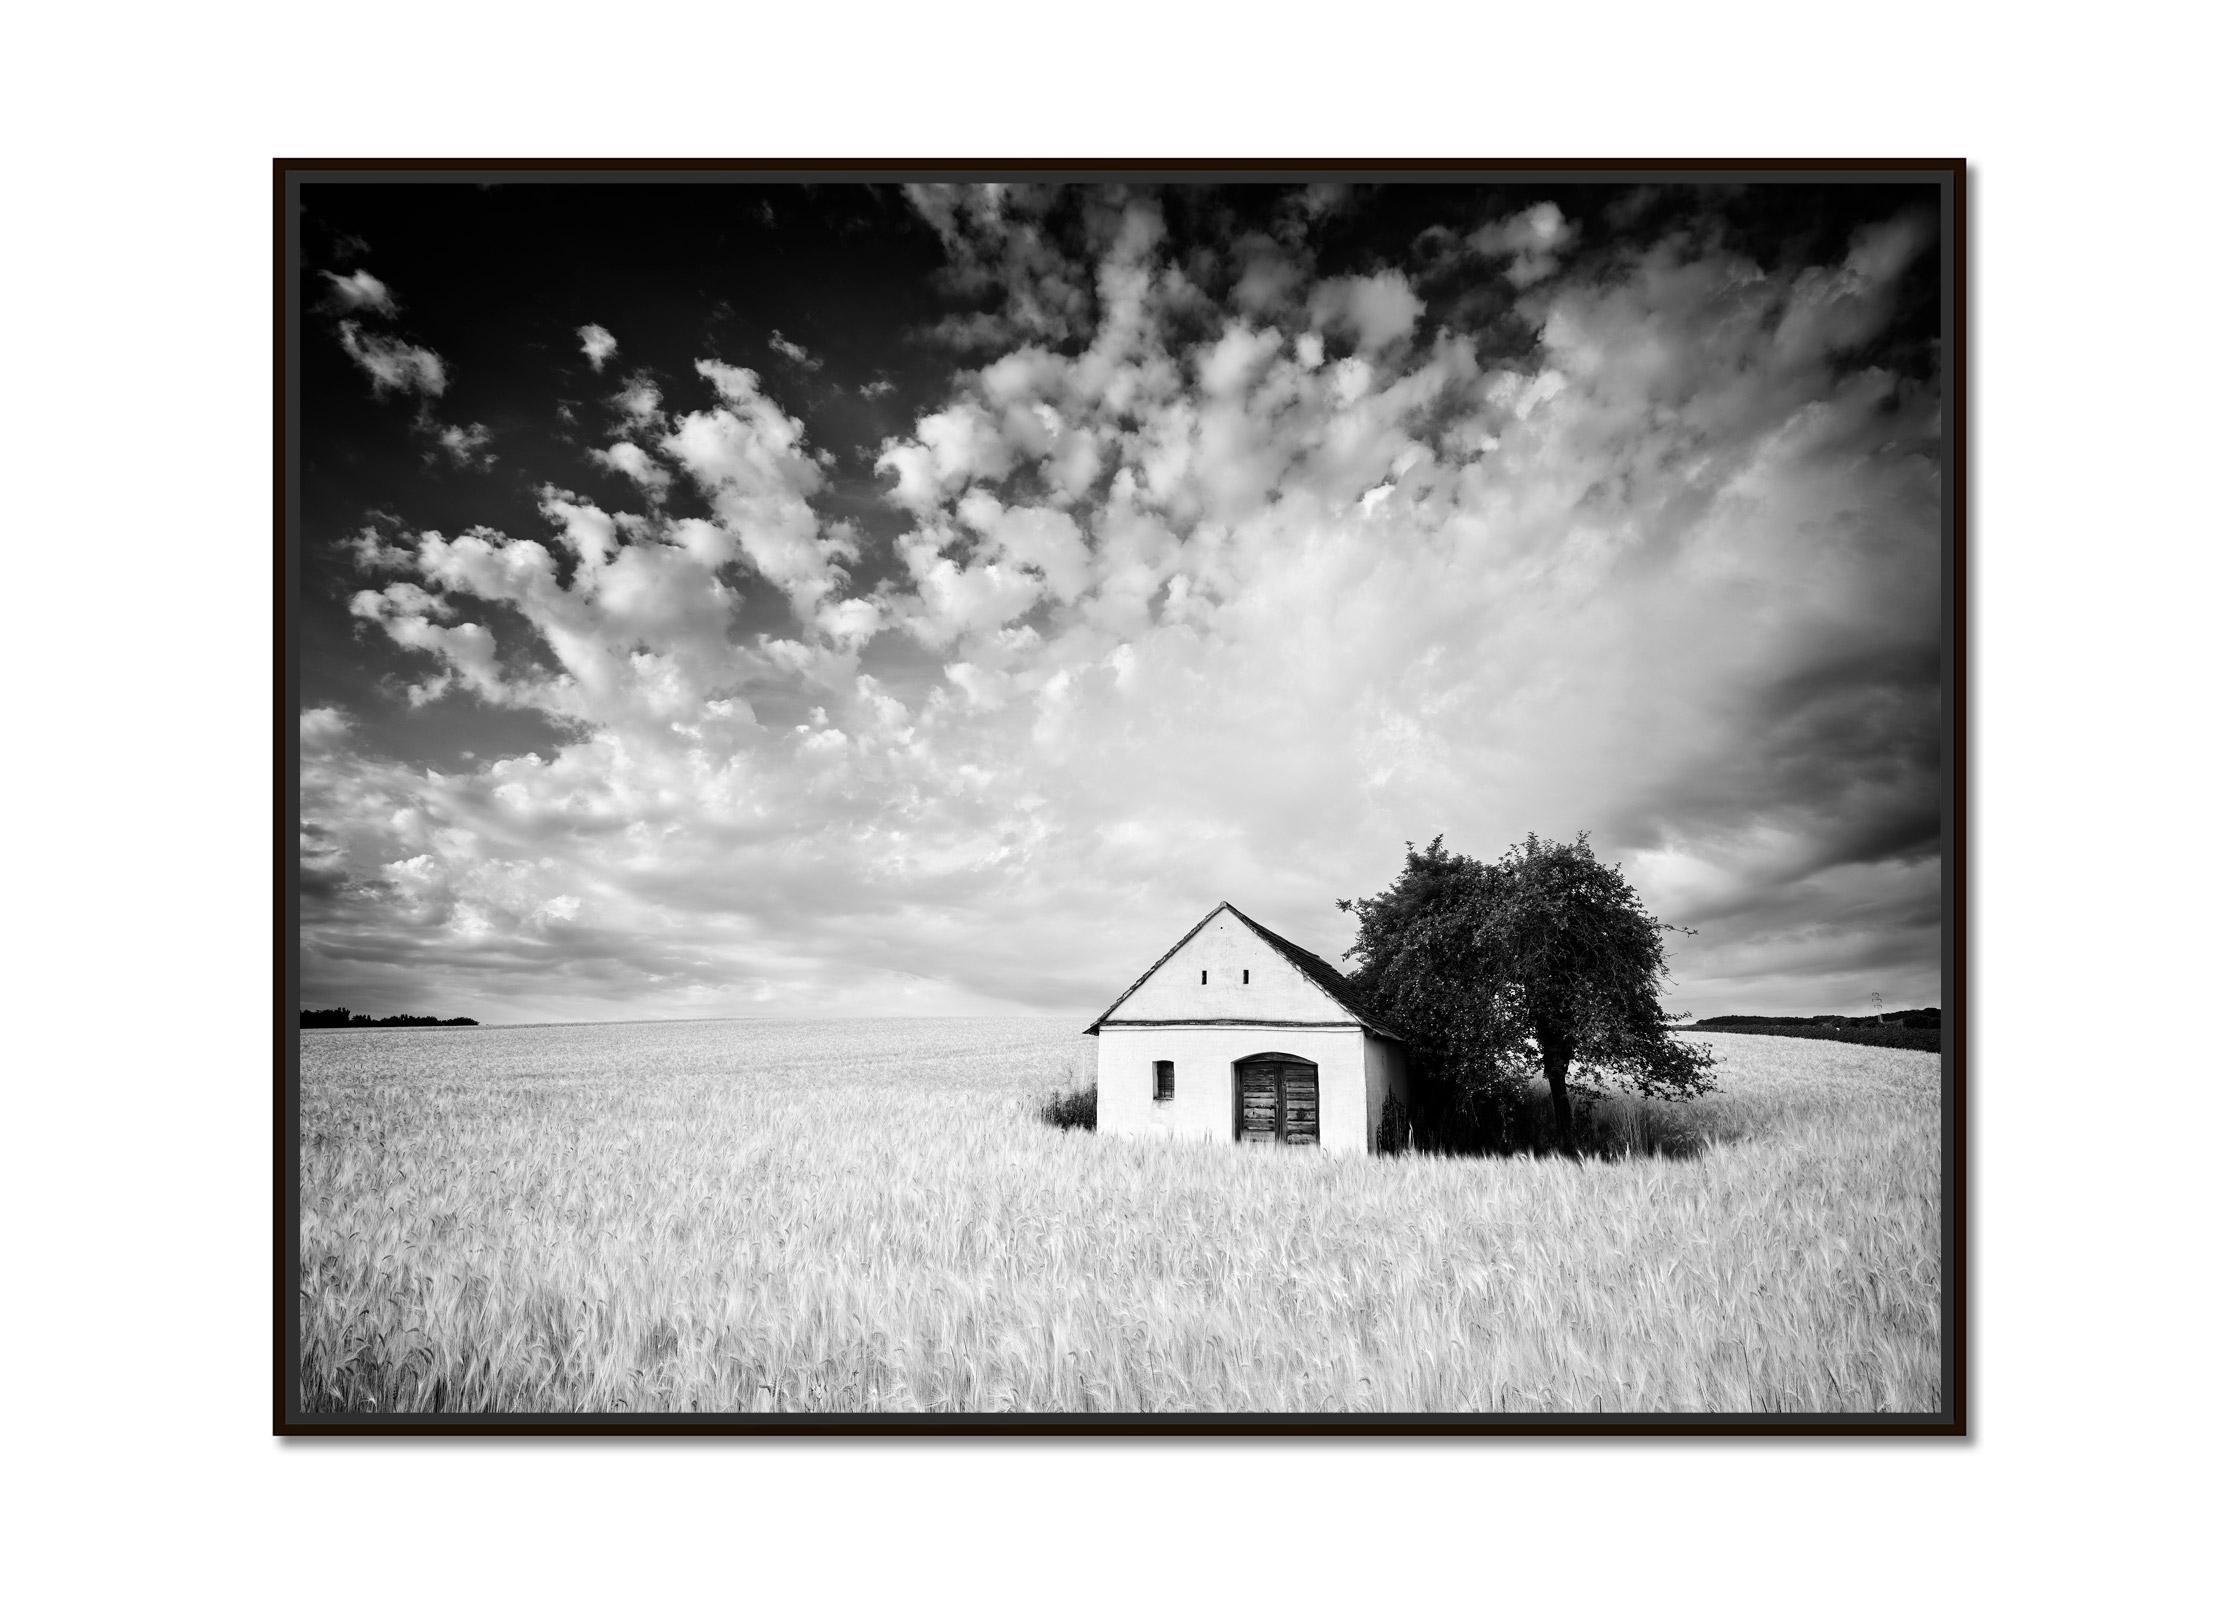 Wine Press House, Cornfield, Tree, black and white landscape art photography  - Photograph by Gerald Berghammer